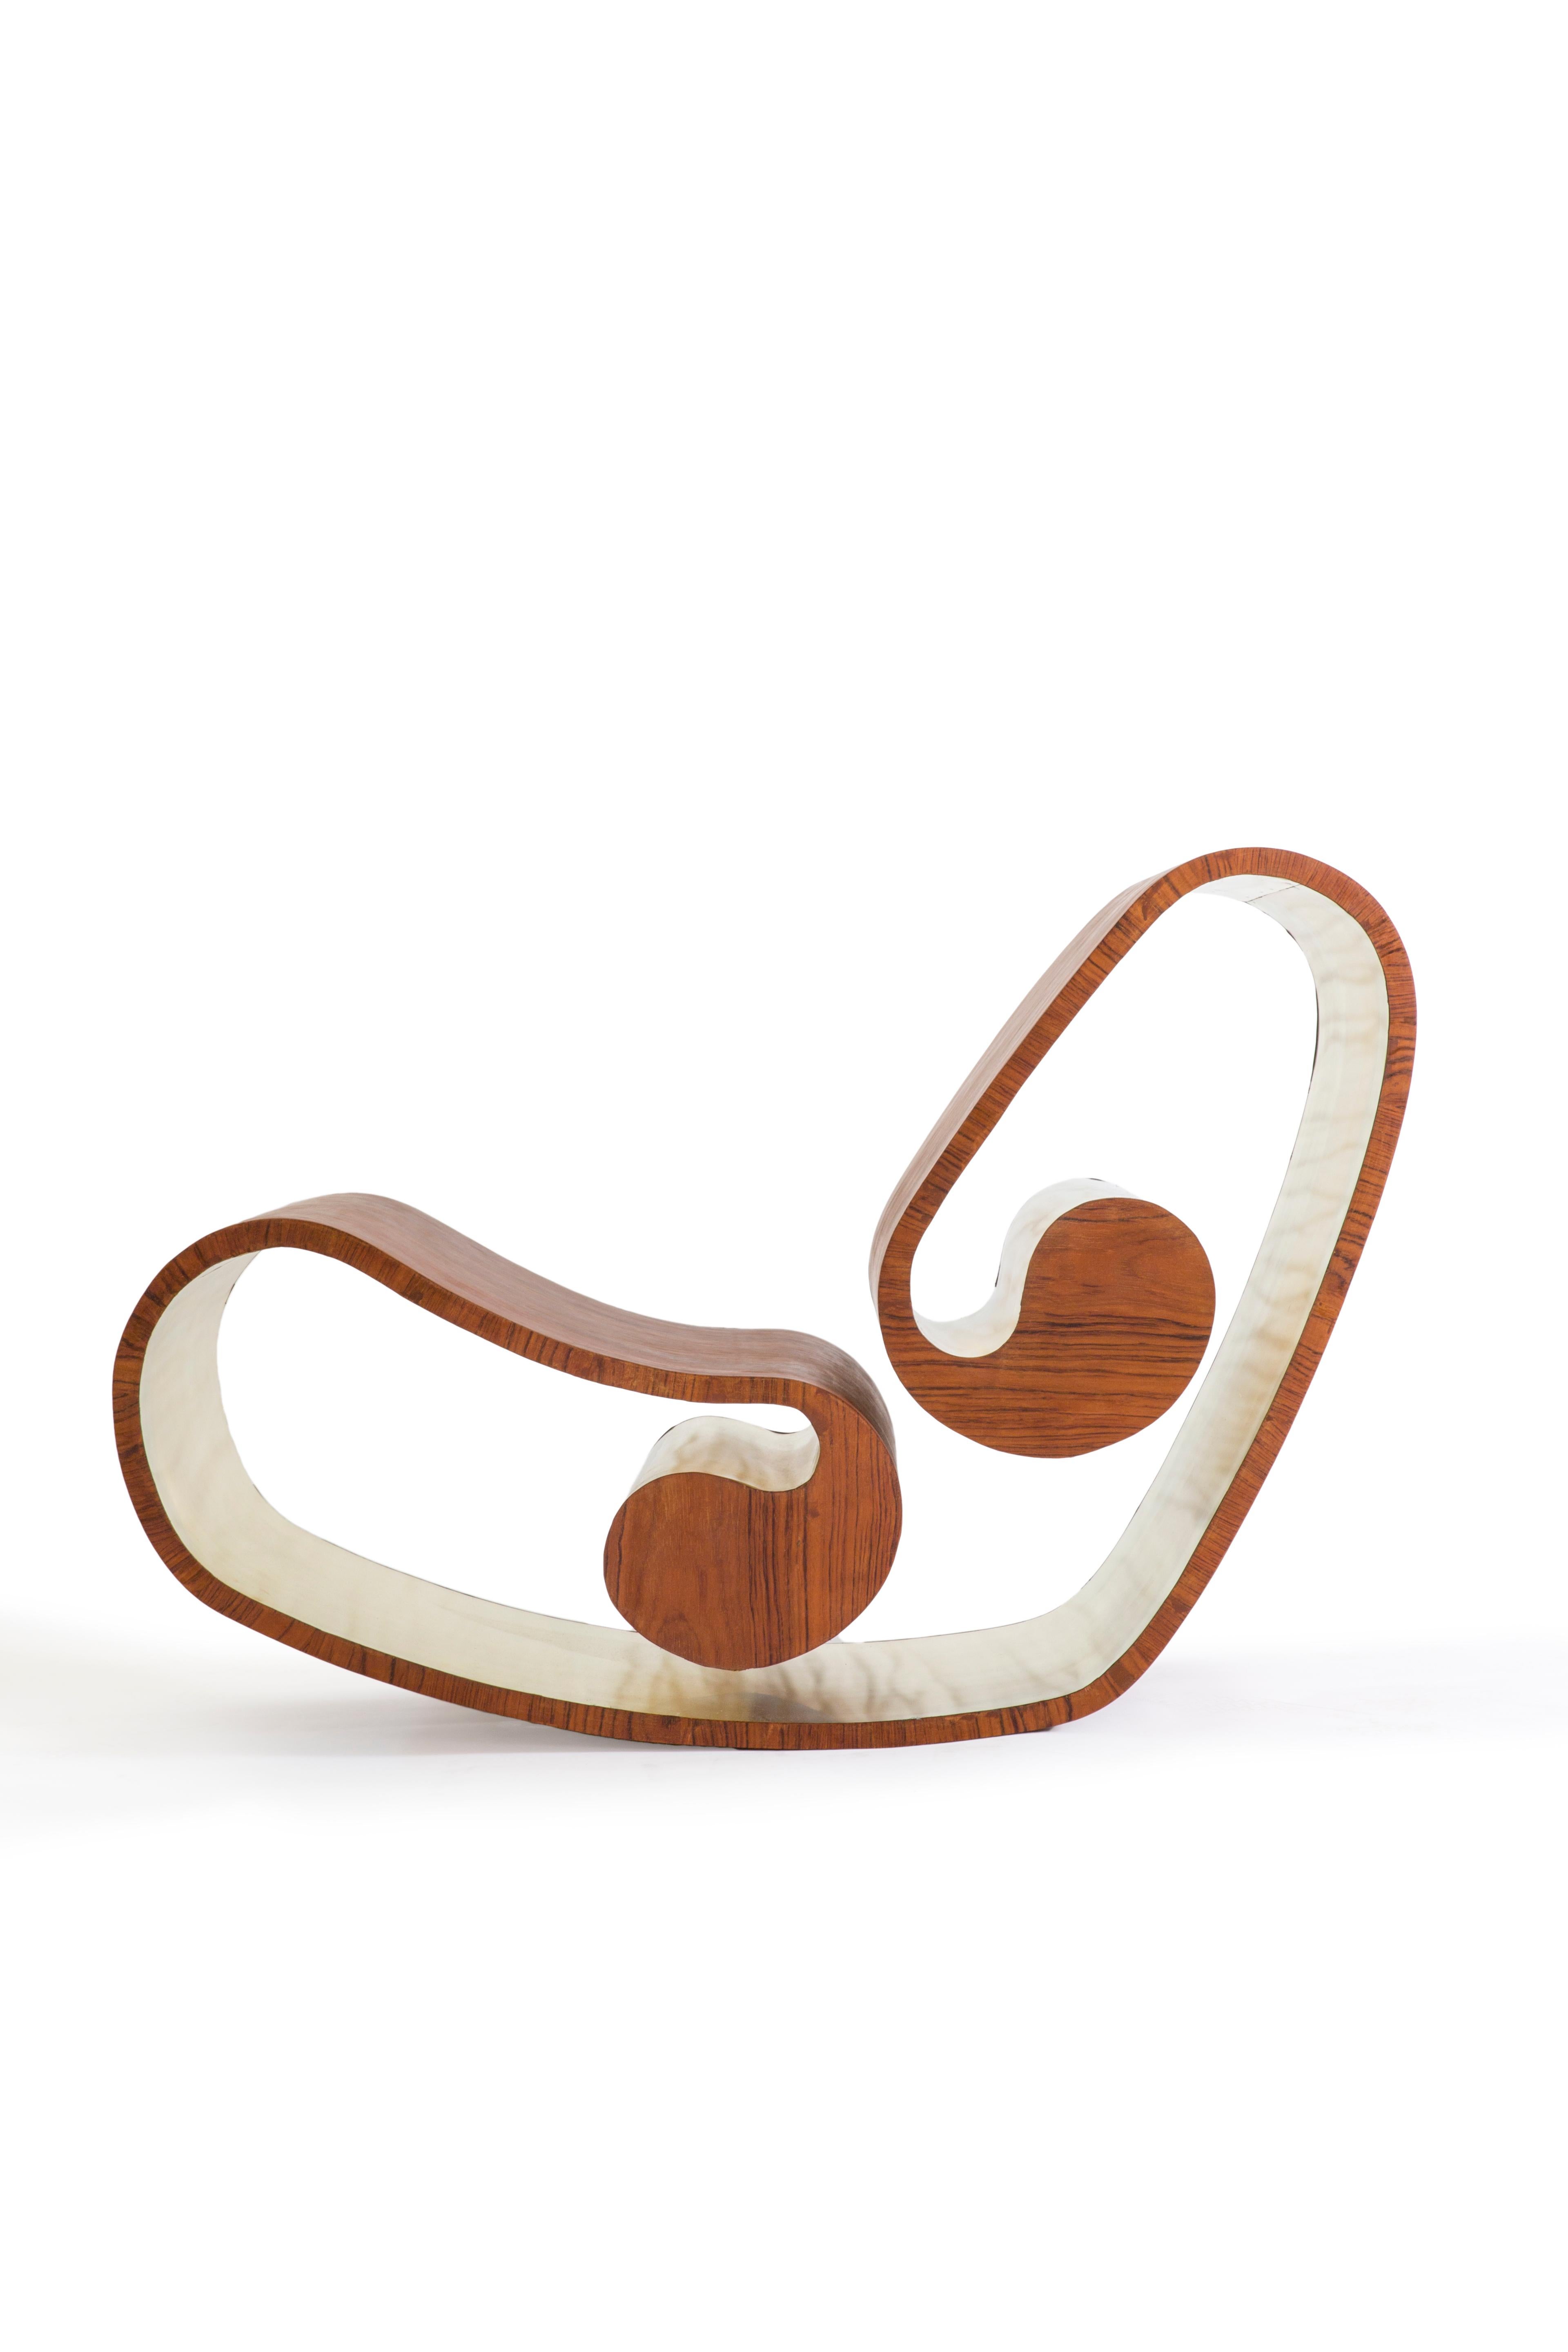 Other Voluta Rocking Chair by Secondome Edizioni For Sale